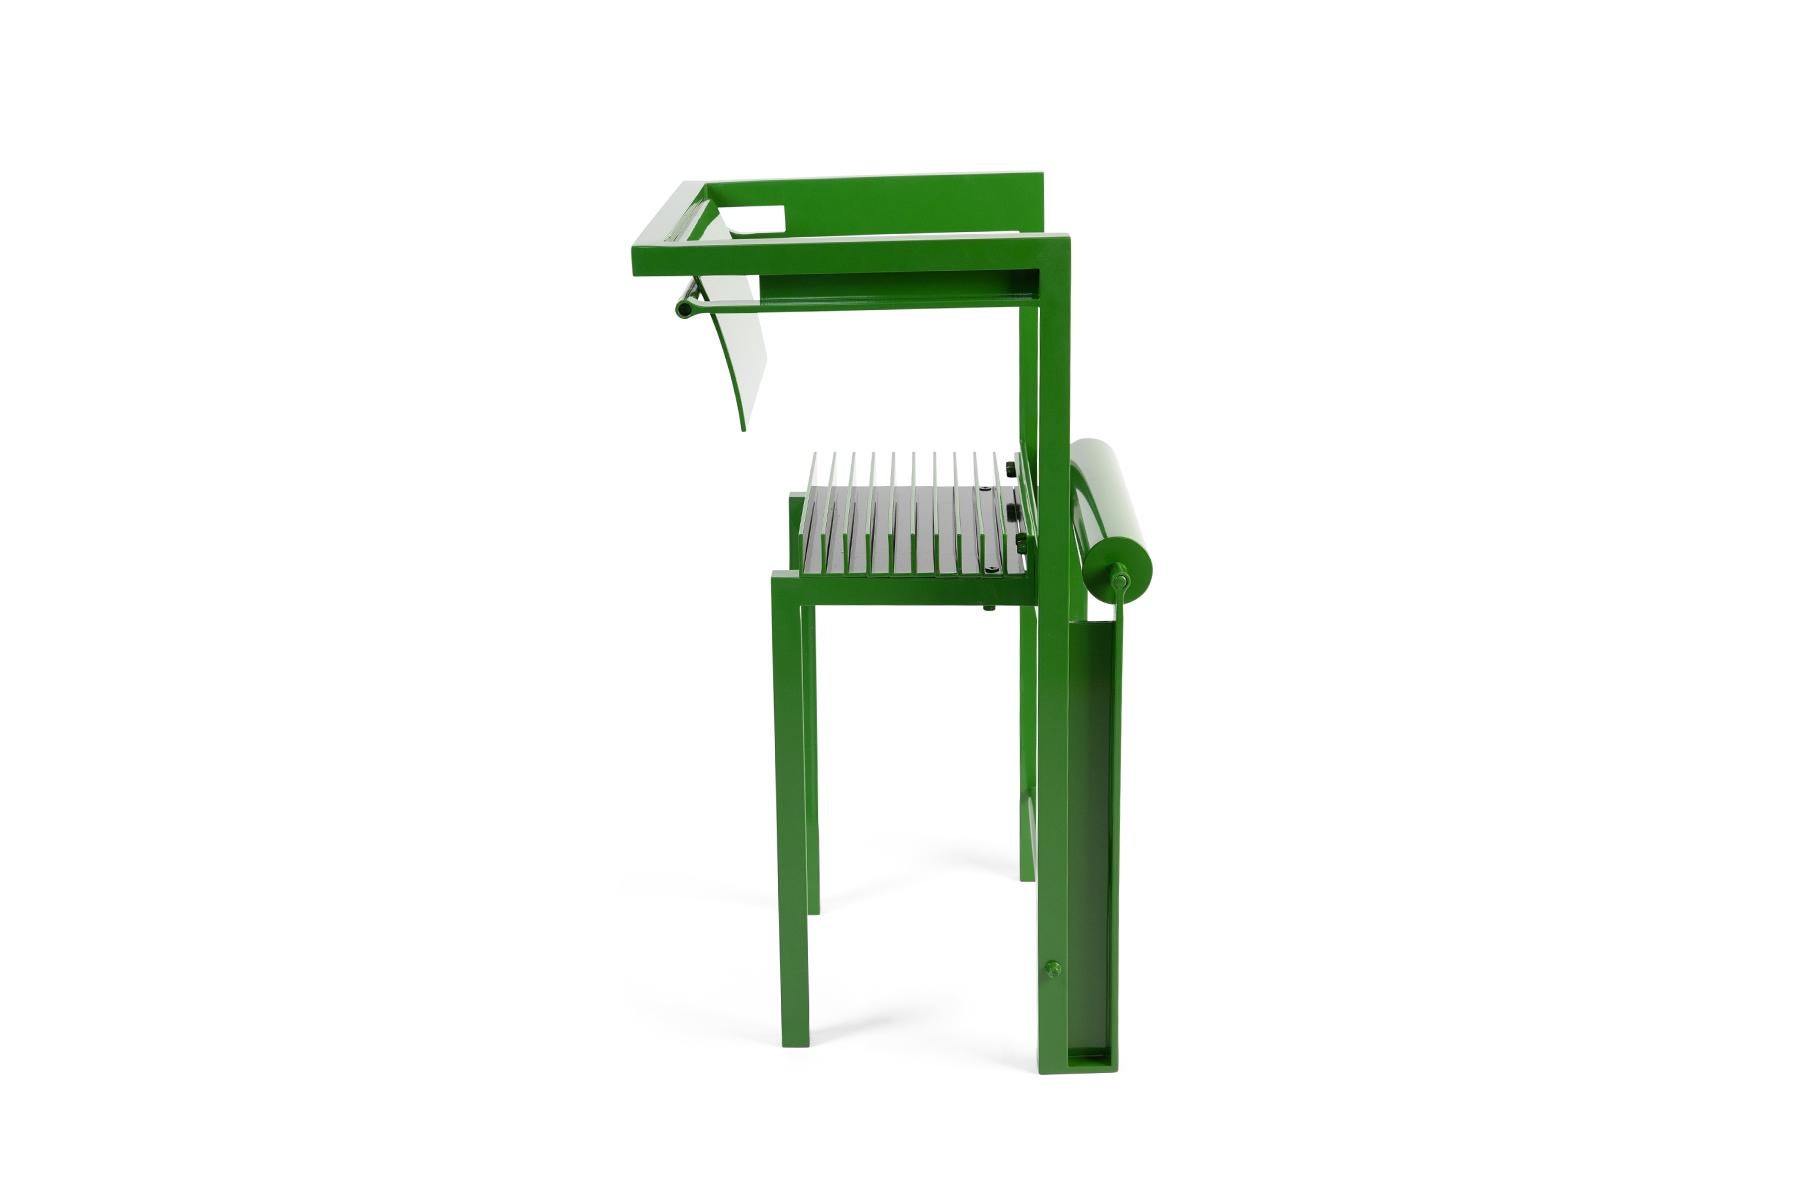 Robert Whitton one off aluminum chair circa late 1980s. This example has been newly powder coated in green and features a bar on the front of the chair that spins to ease getting in and out.